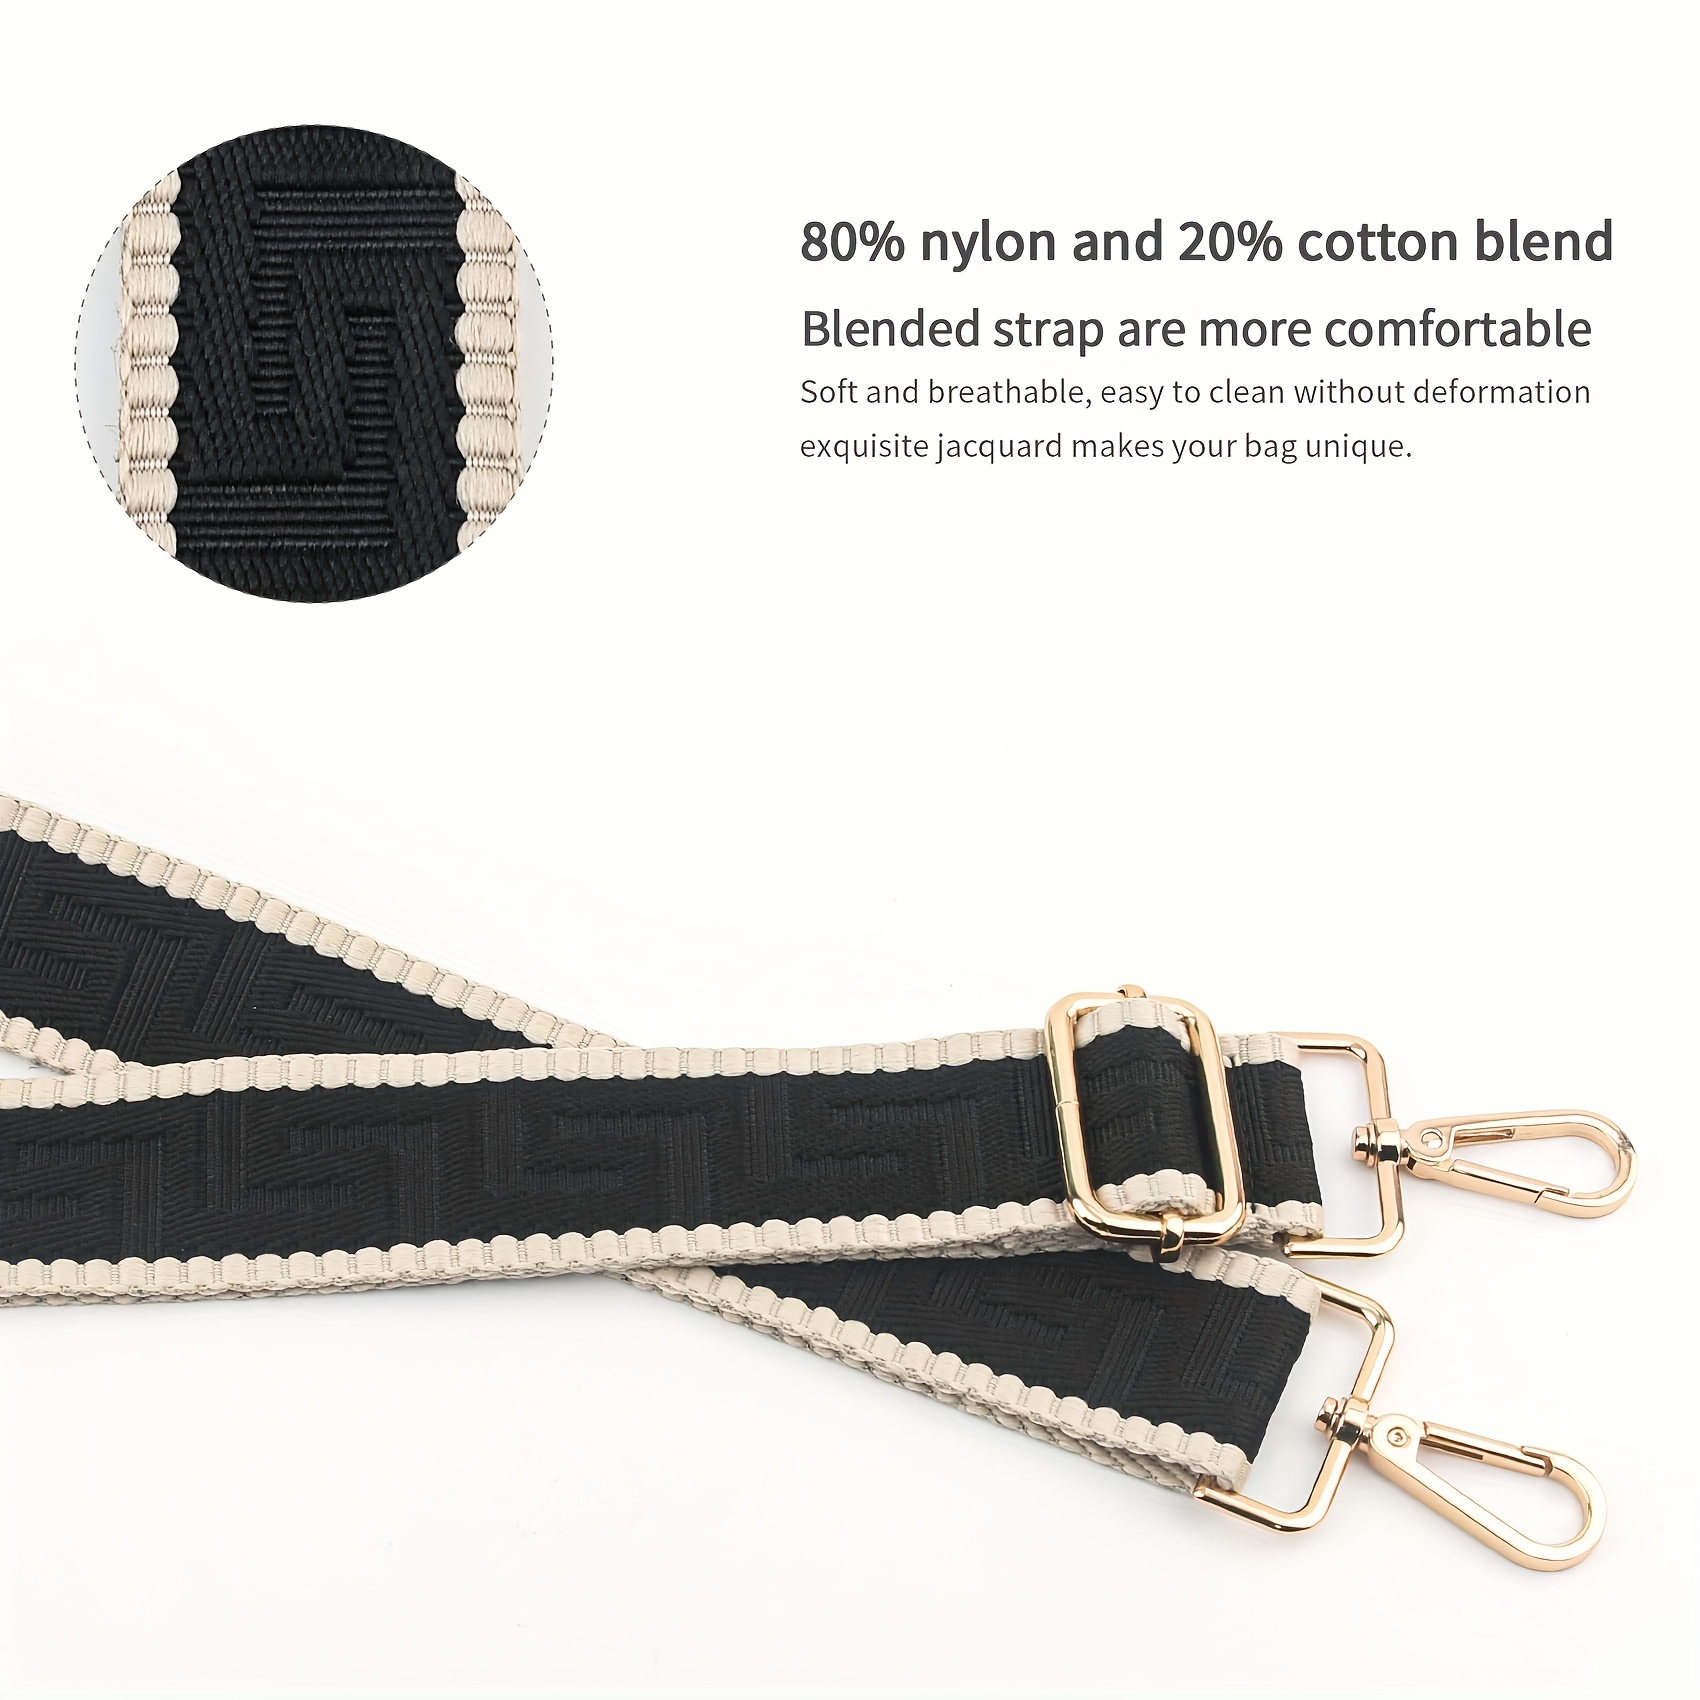 Wide Black Crossbody Bag Strap Cotton, Leather Strap Replacement